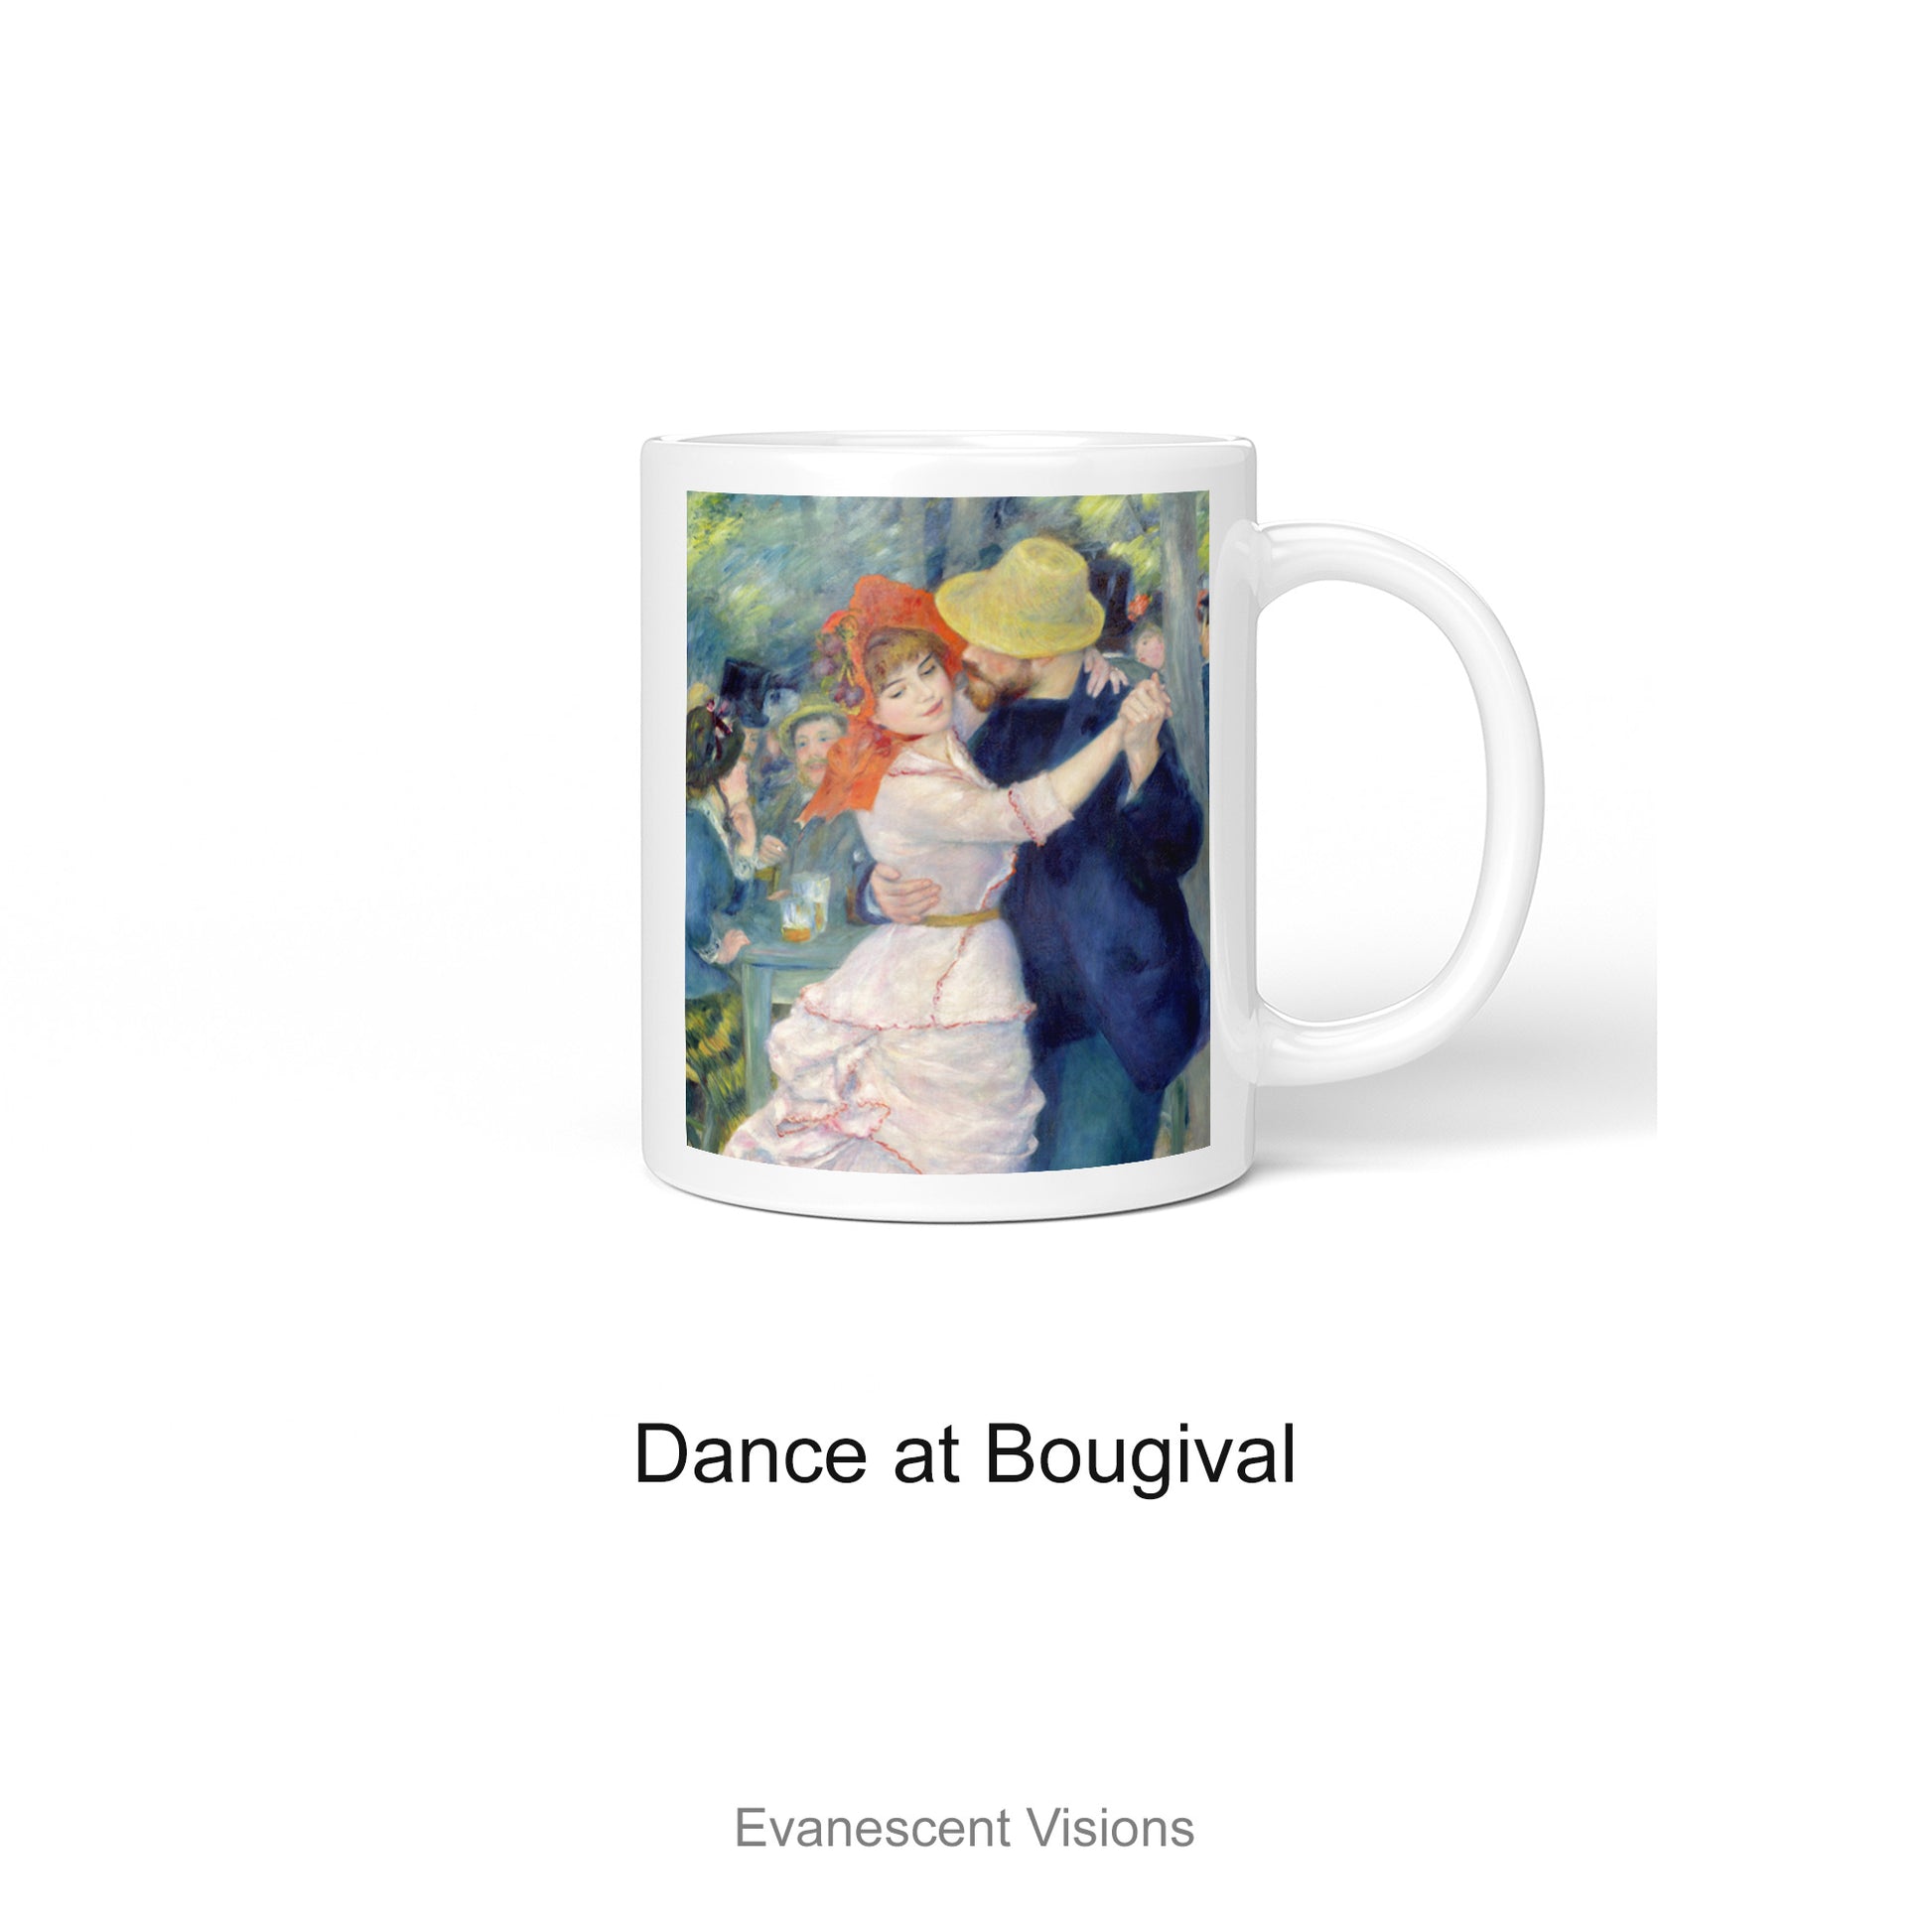 Dance at Bougival personalised Art Mug for Anniversary or Valentine's Day